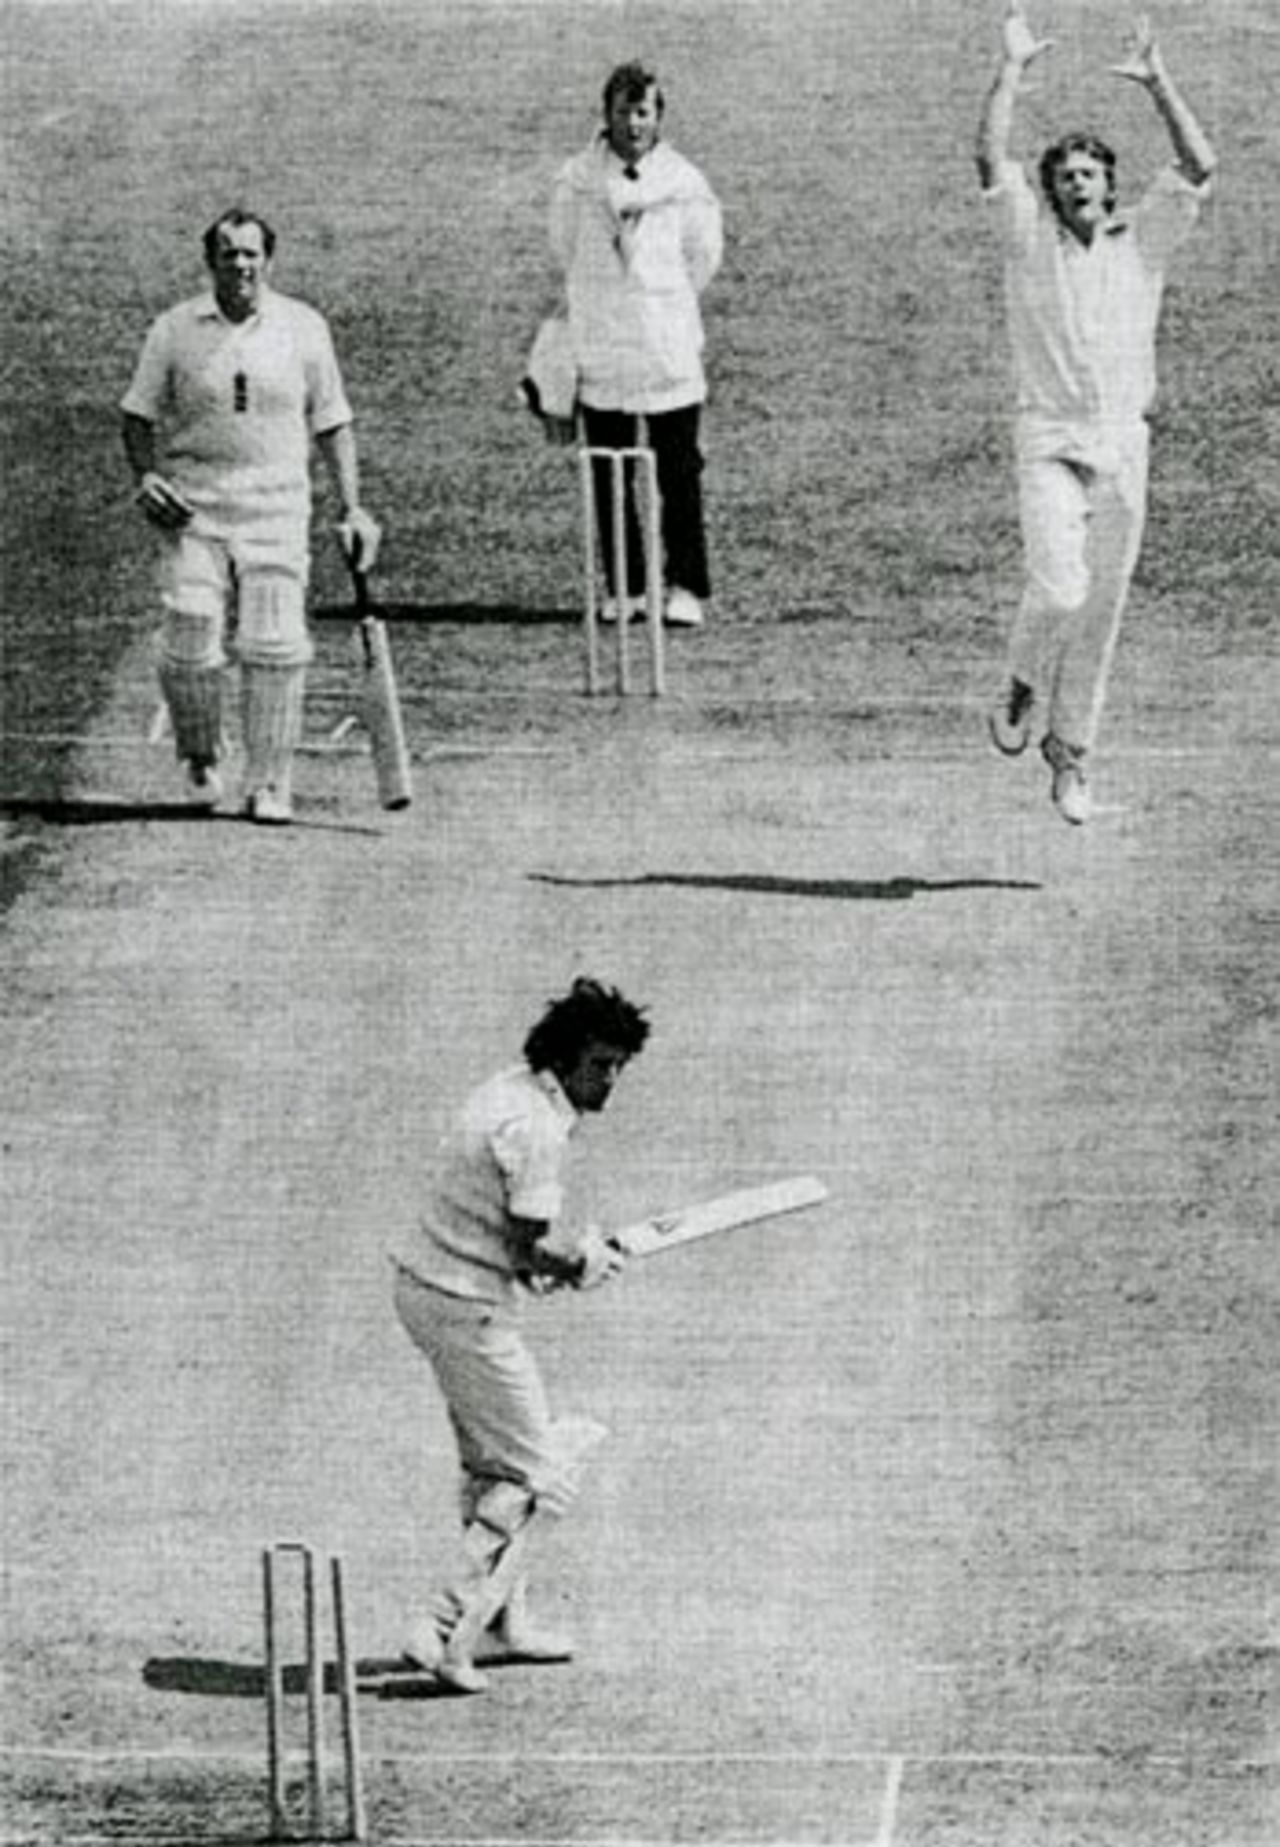 Bob Massie bowls John Snow on his way to 16 for 137, England v Australia, 2nd Test, Lord's, June 23 1972